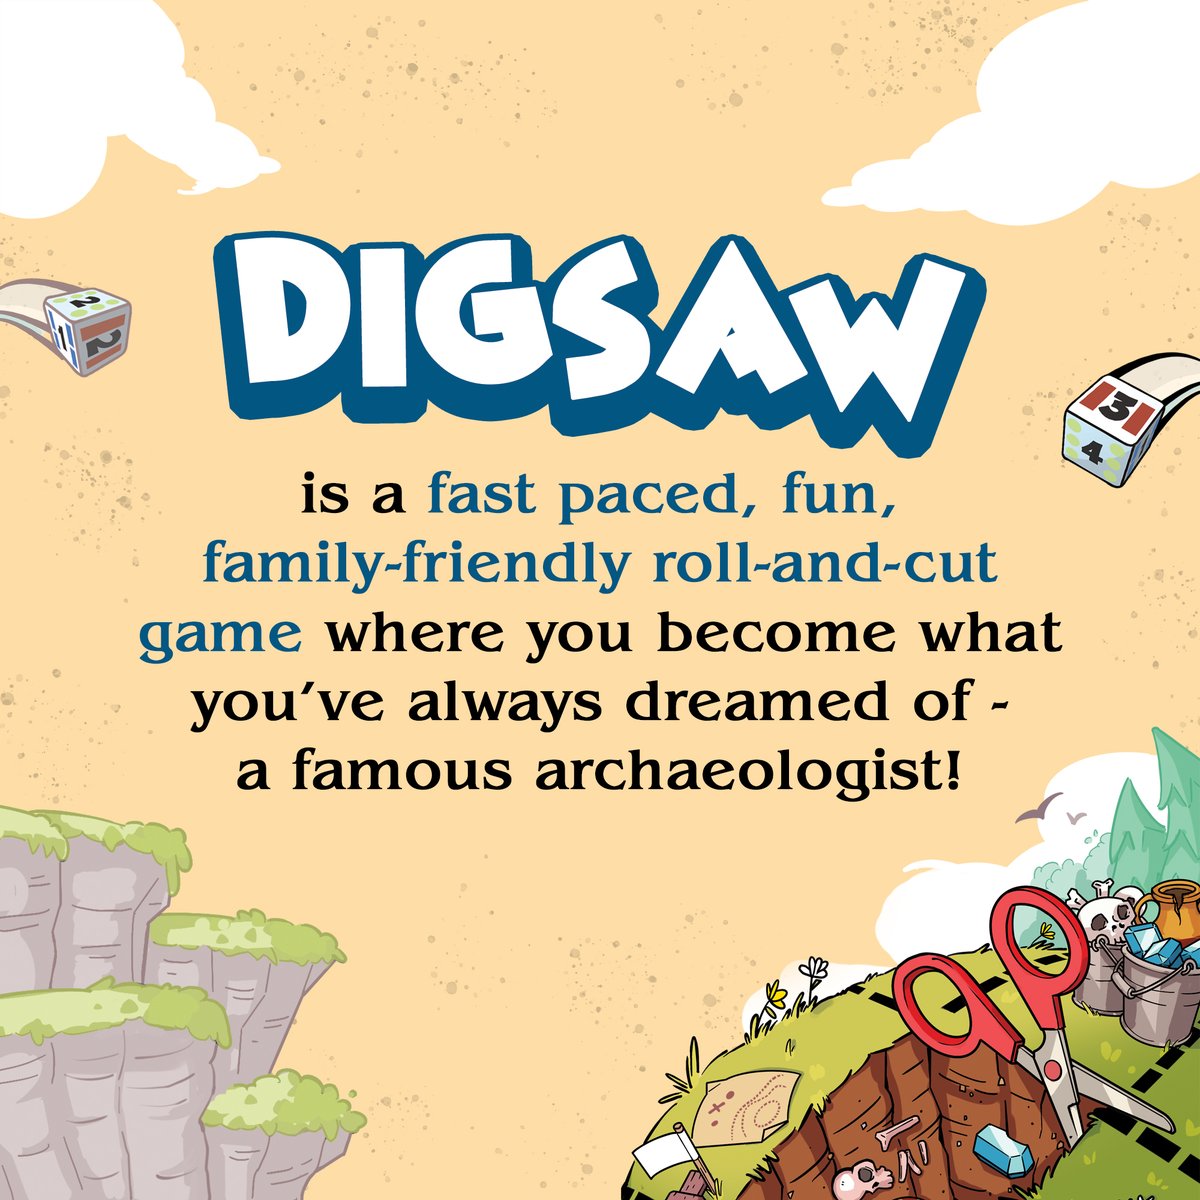 Lets dig deep into Digsaw! ✂️